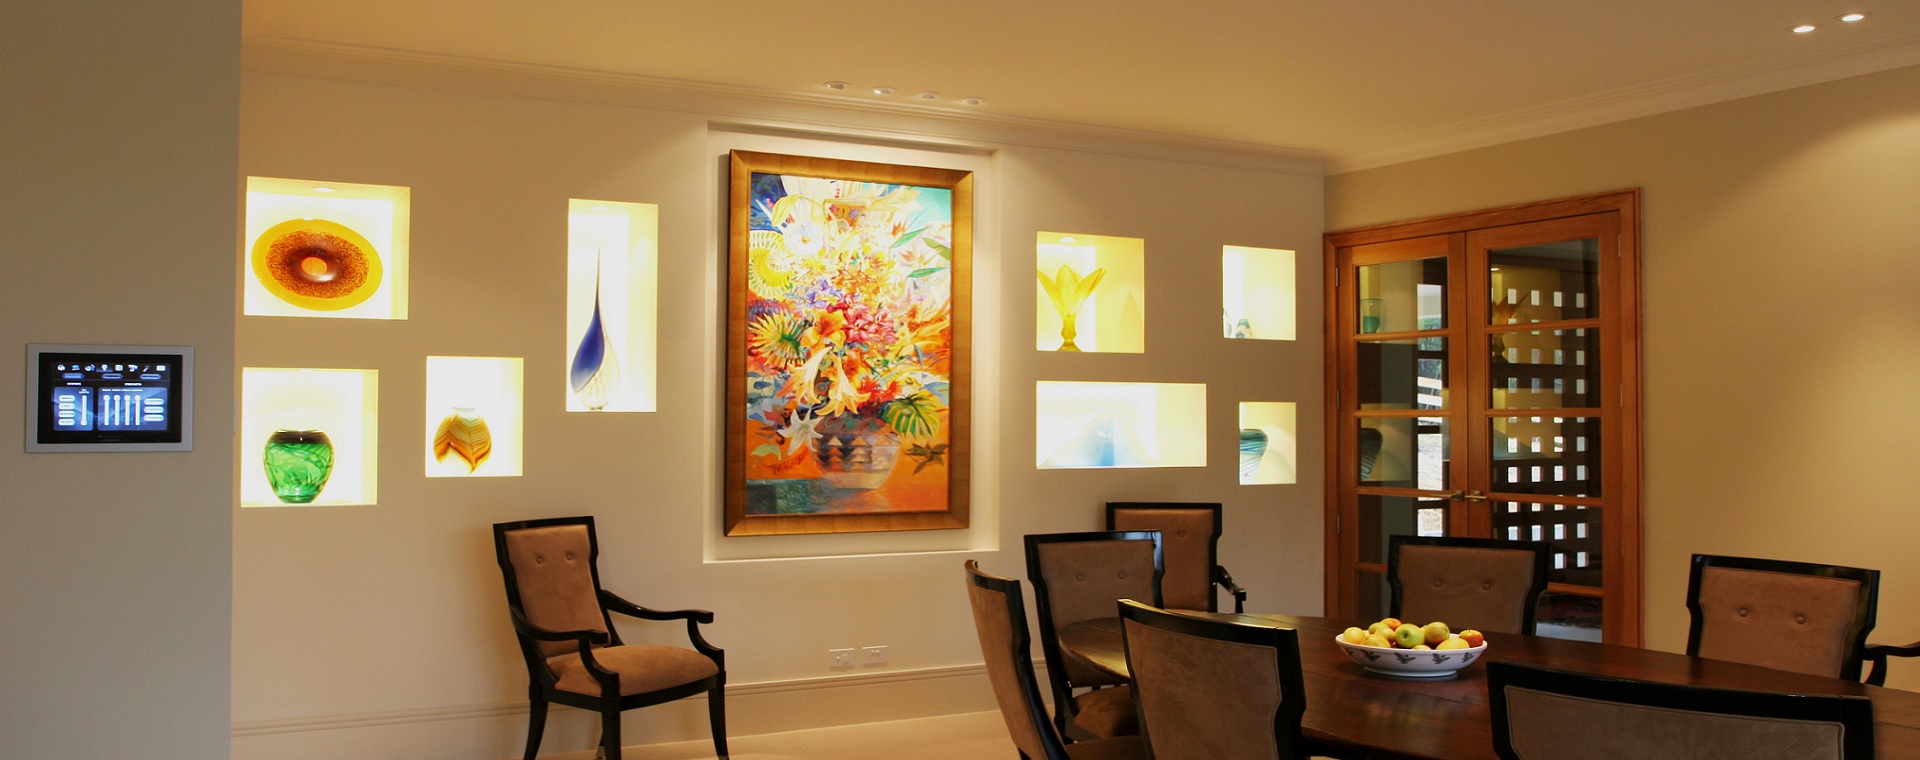 Formal dining room in a modern home featuring a home automation touchscreen controlling the art feature lights